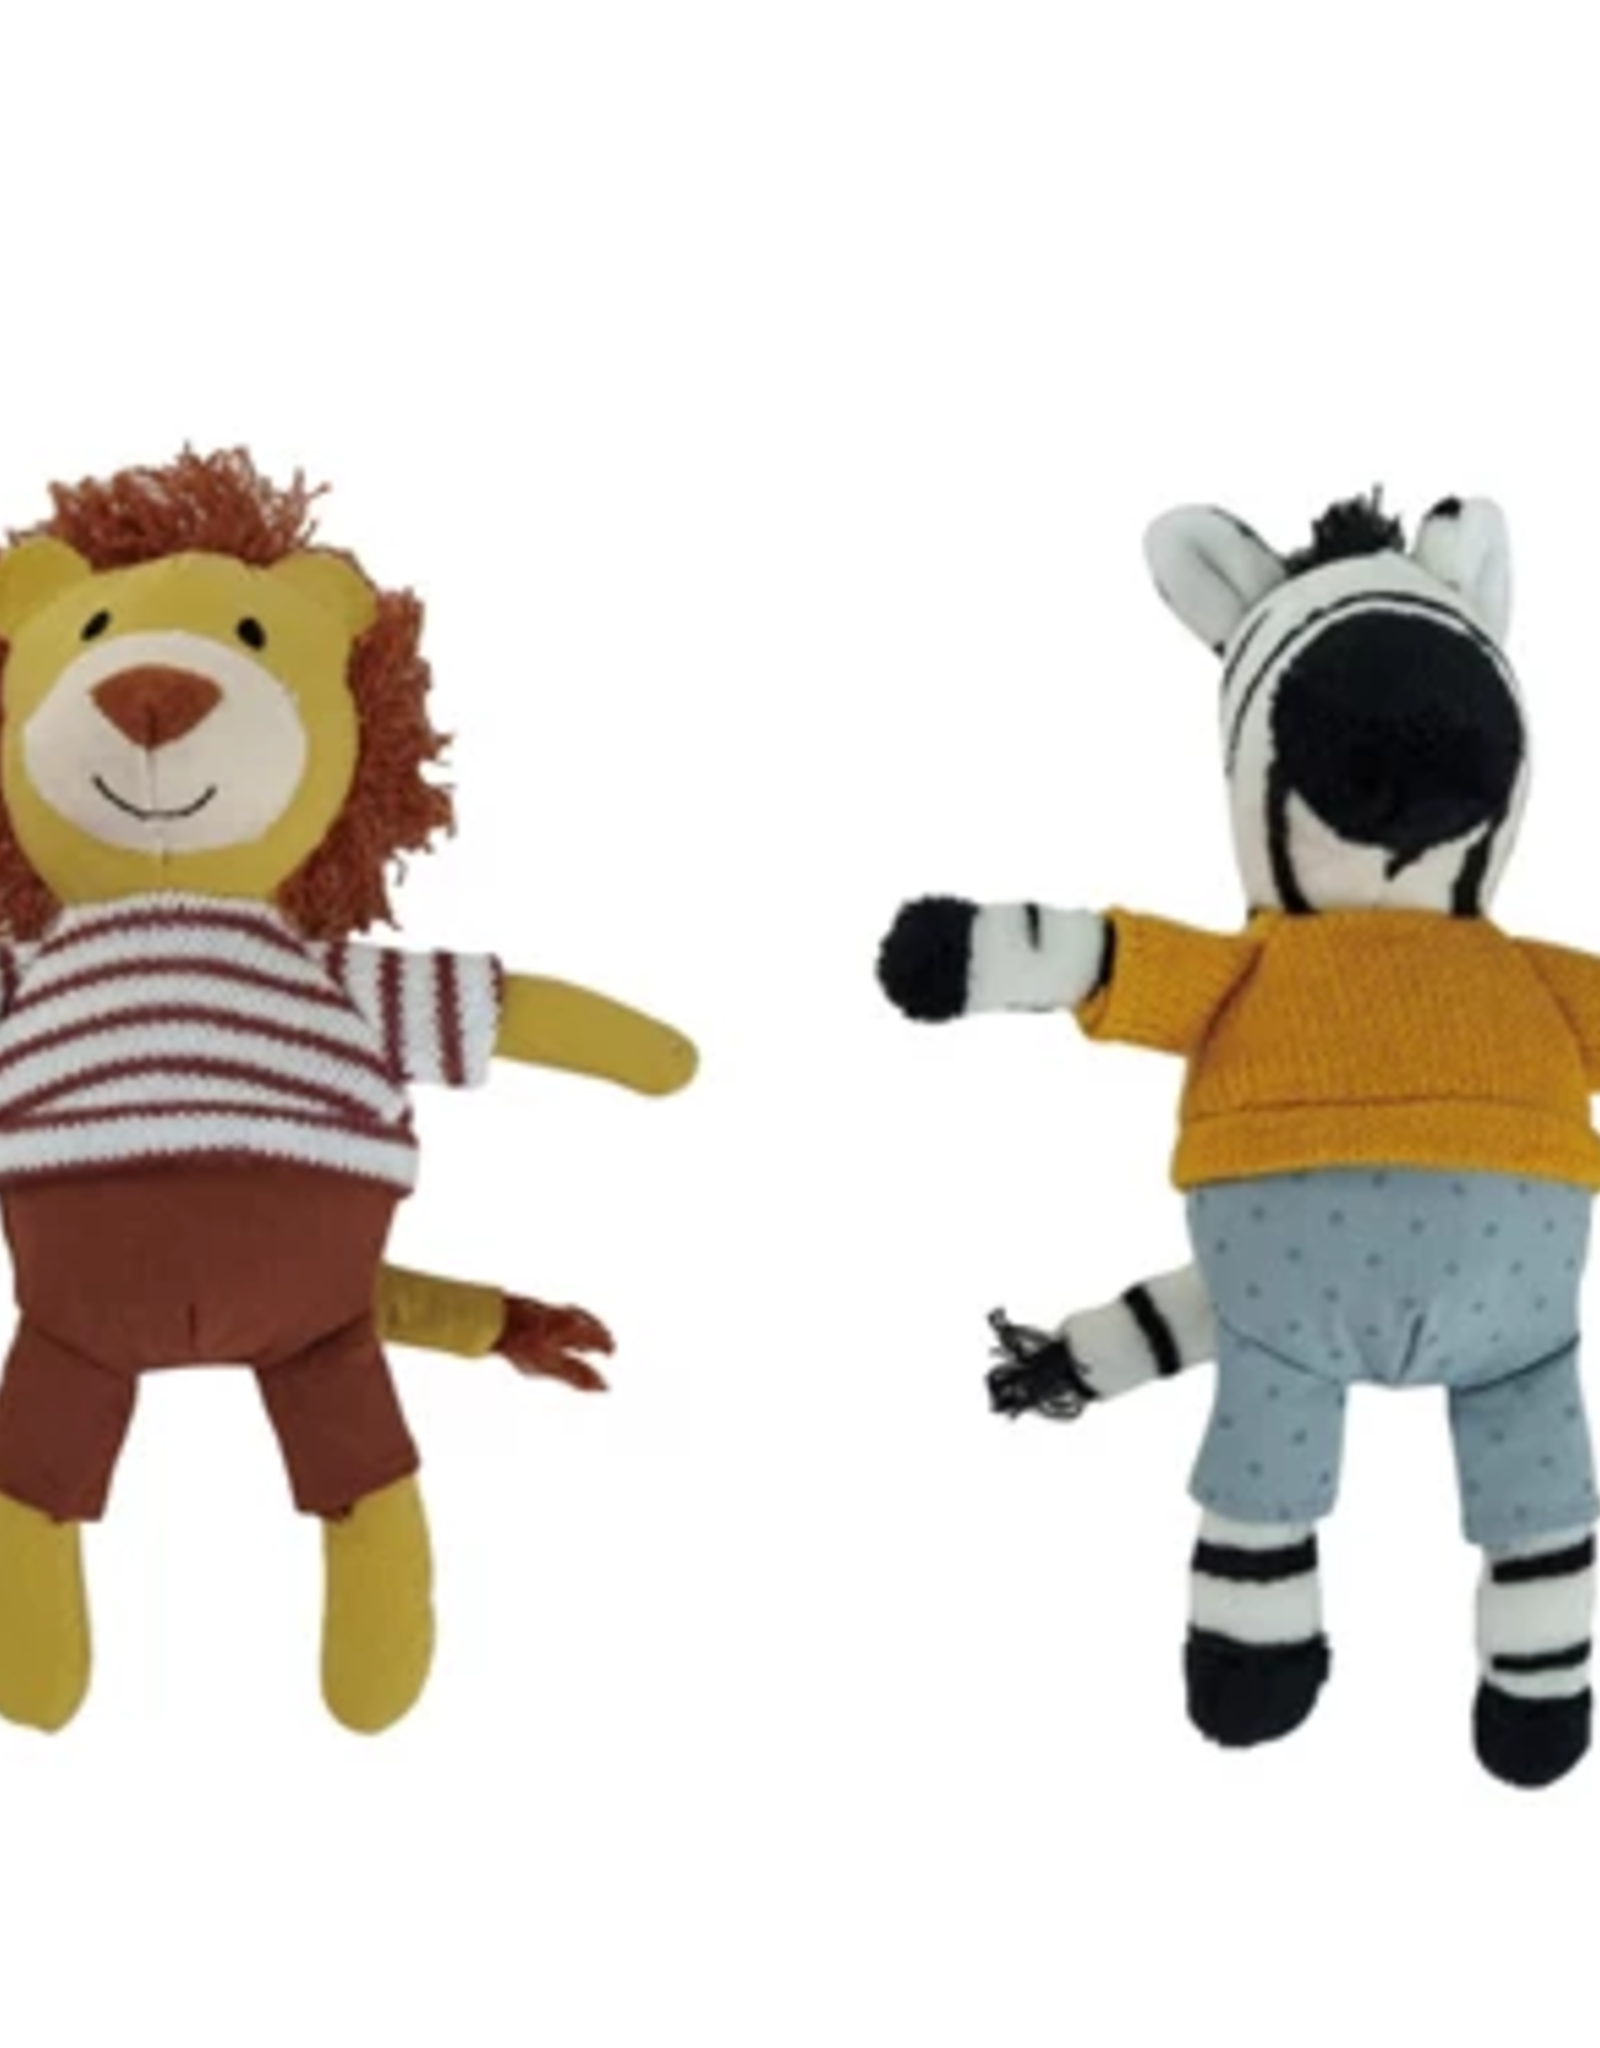 Plush Animal in Clothes, 4 Styles 6-1/2"L